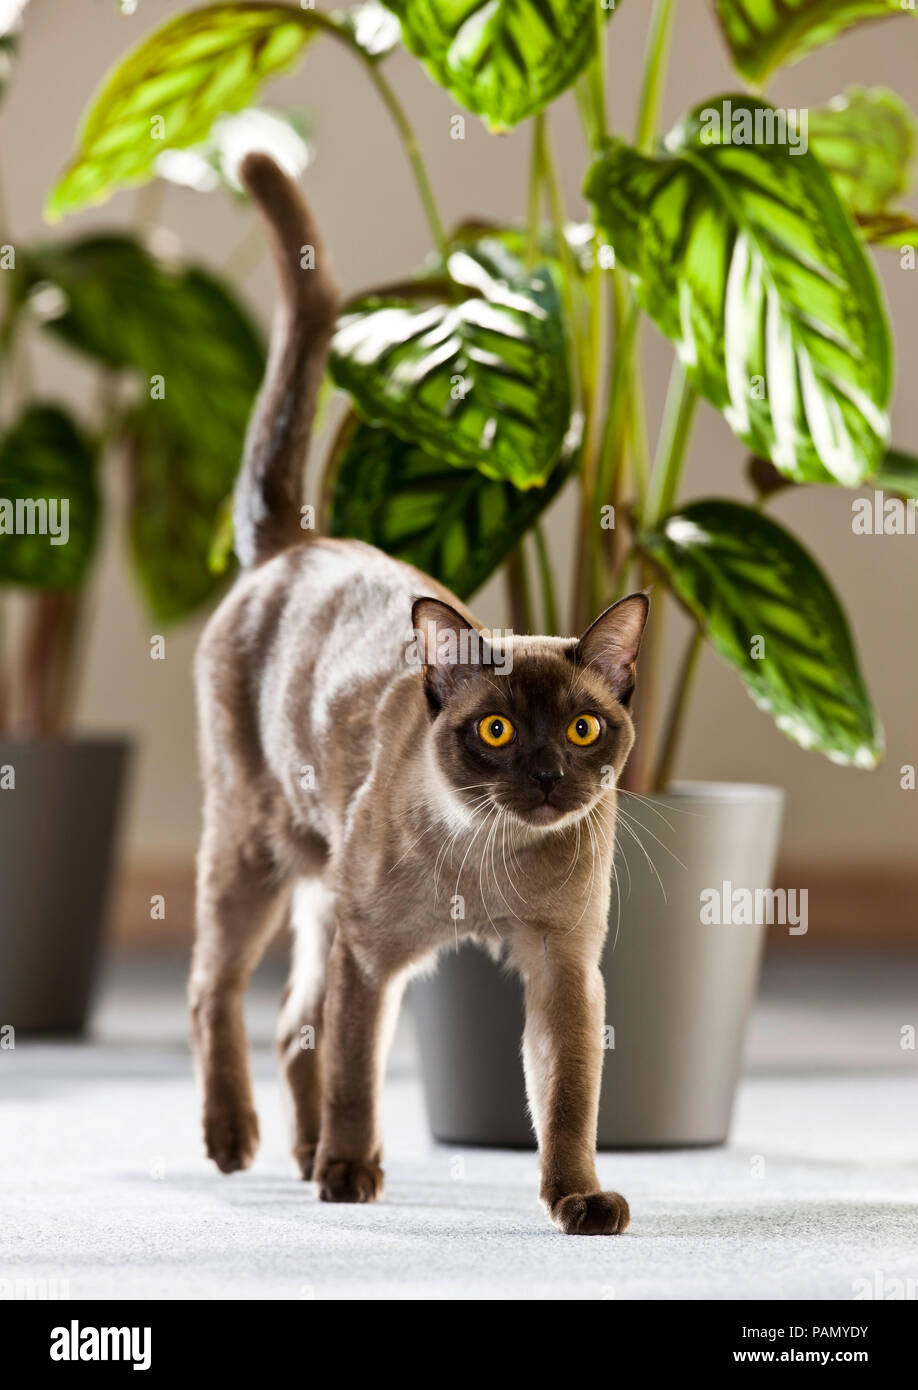 Burmese cat. Adult walking in front of a potted plant. Germany Stock Photo